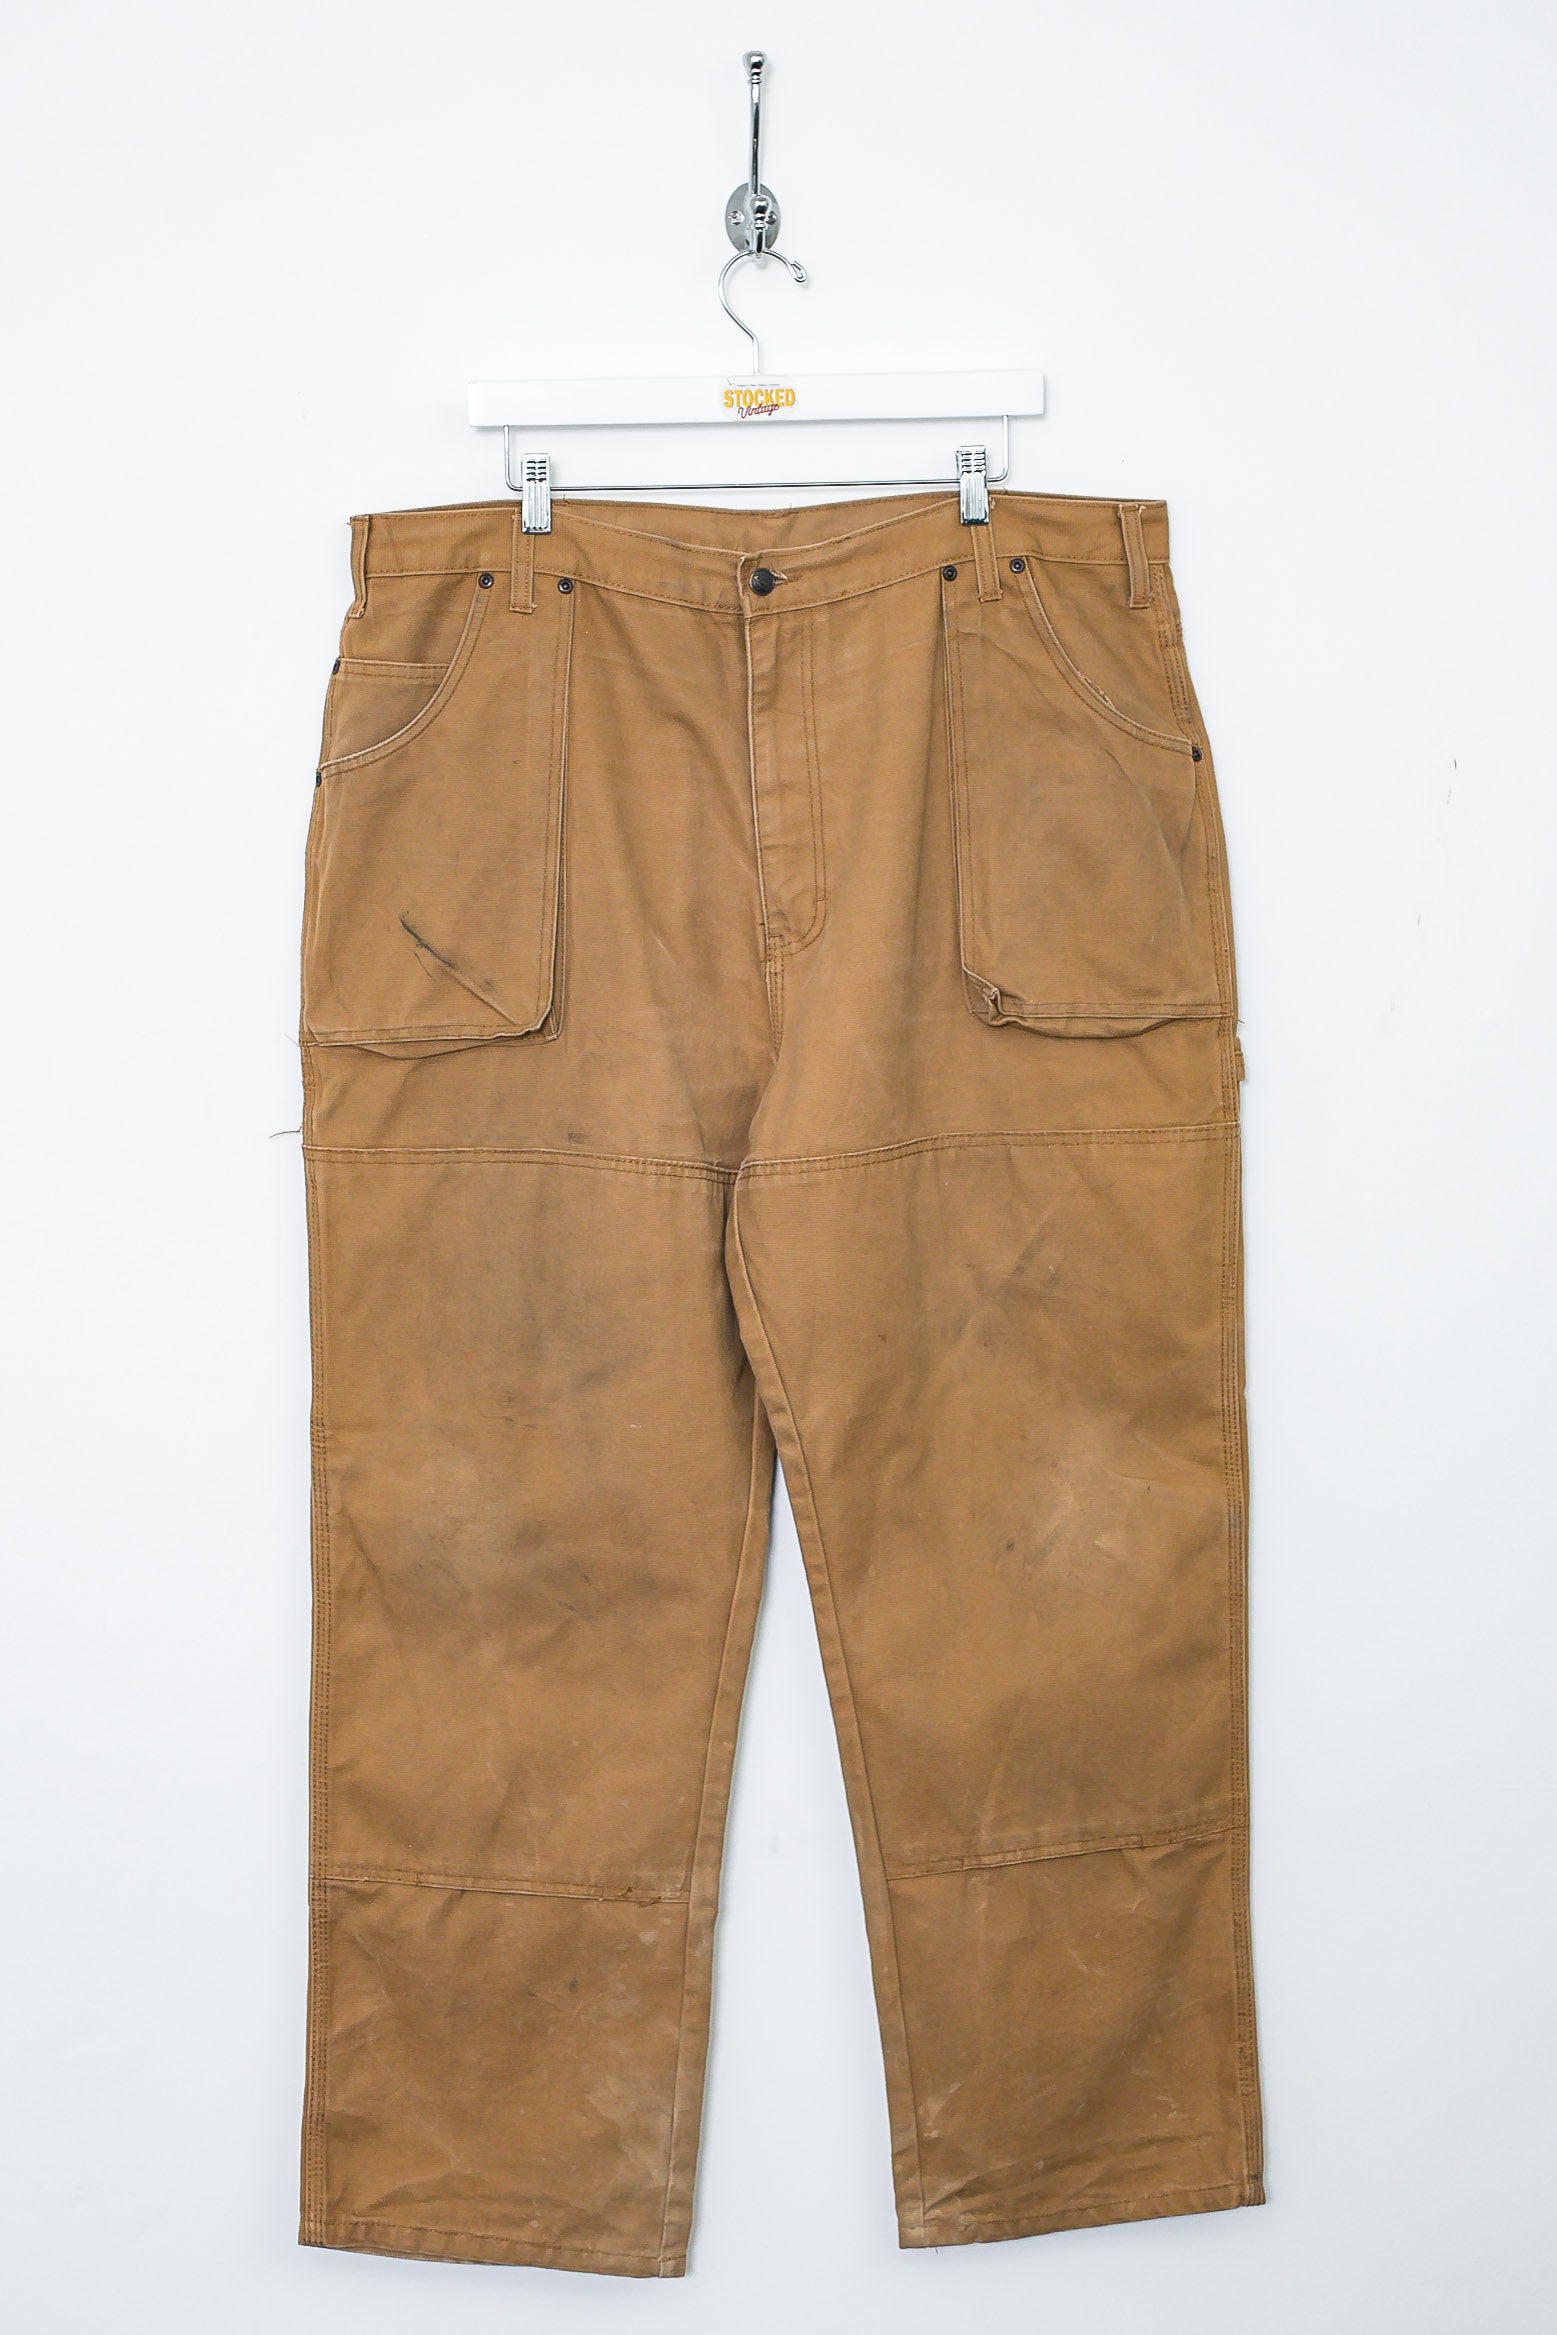 Stretch Canvas Carpenter's Pants for Tall Men | American Tall